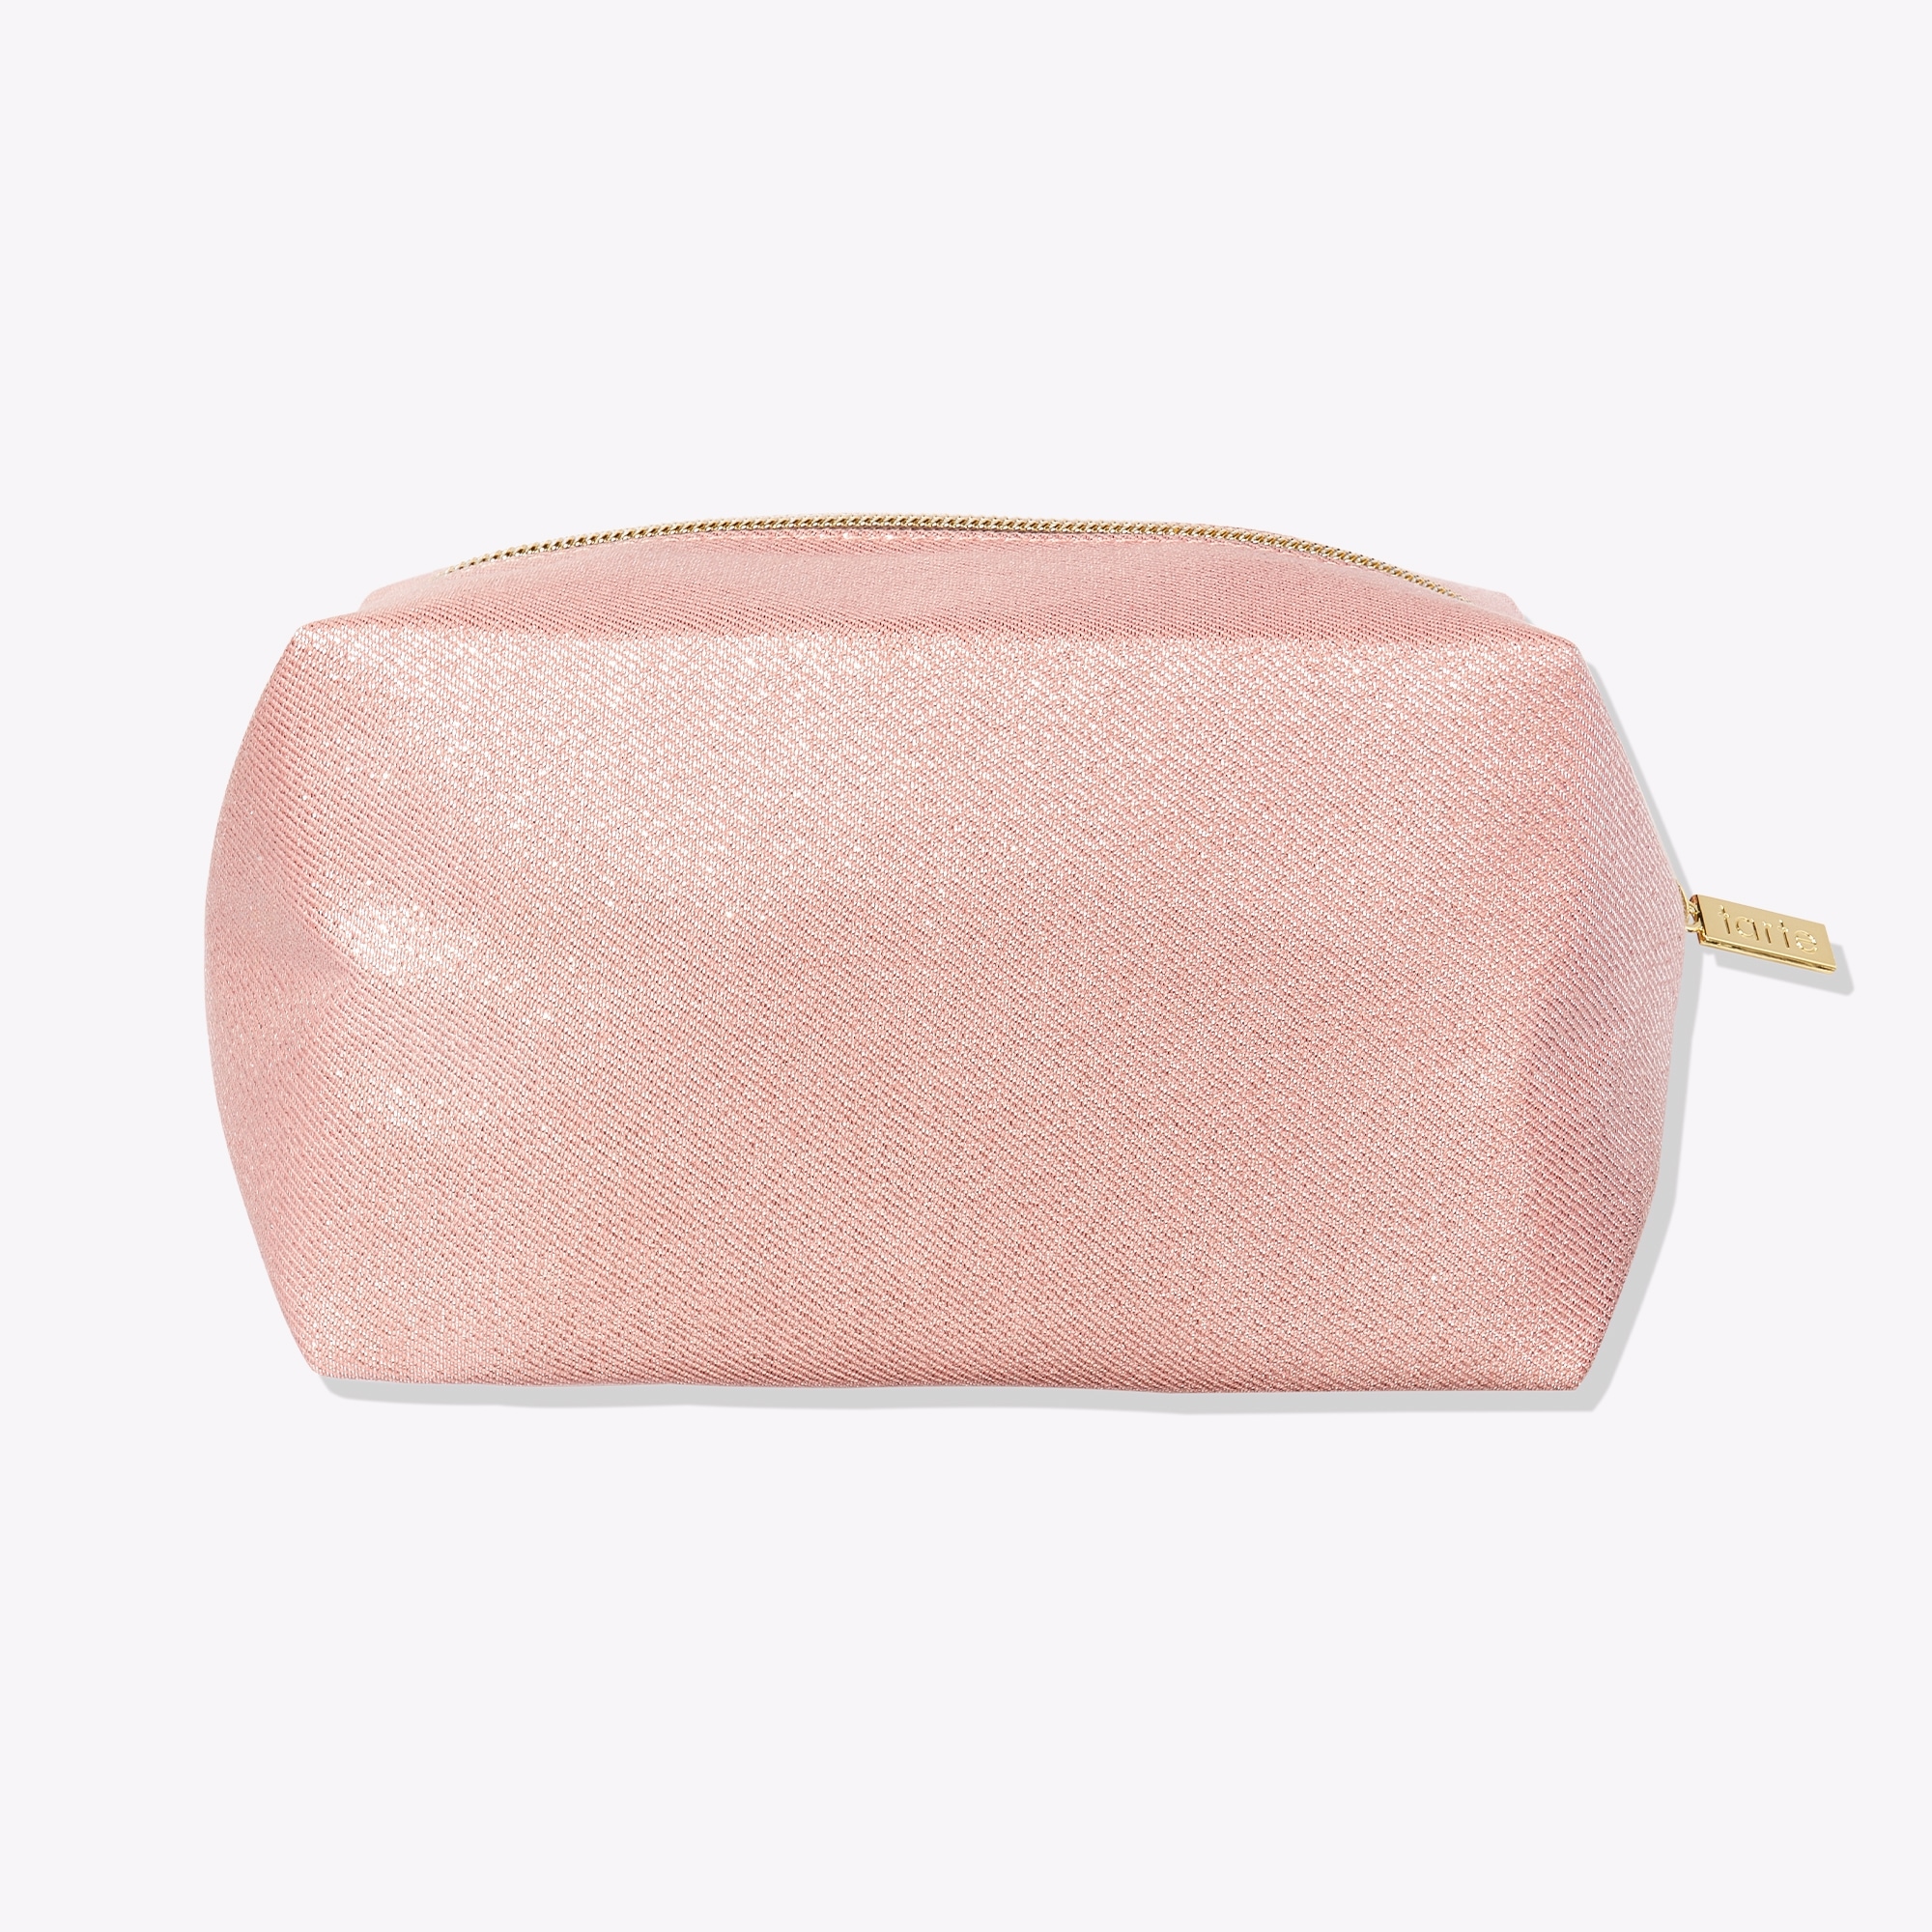 My Makeup Pouch, Coated Lining Pink/Blush